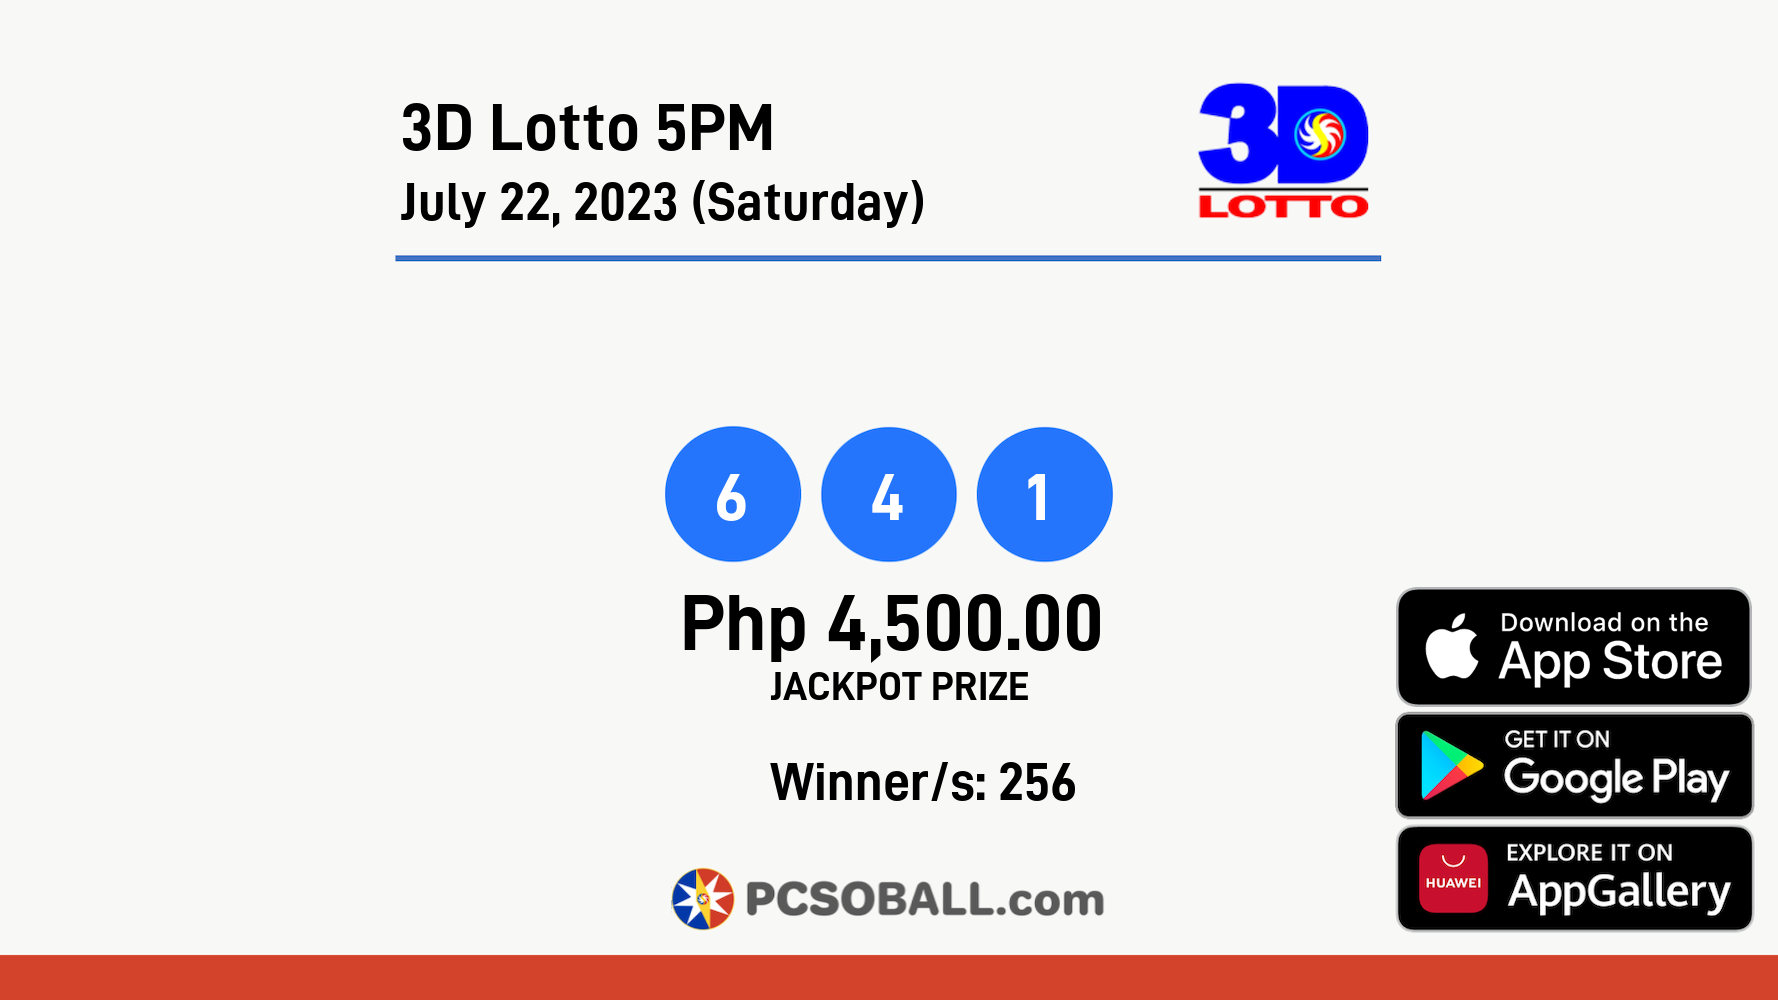 3D Lotto 5PM July 22, 2023 (Saturday) Result